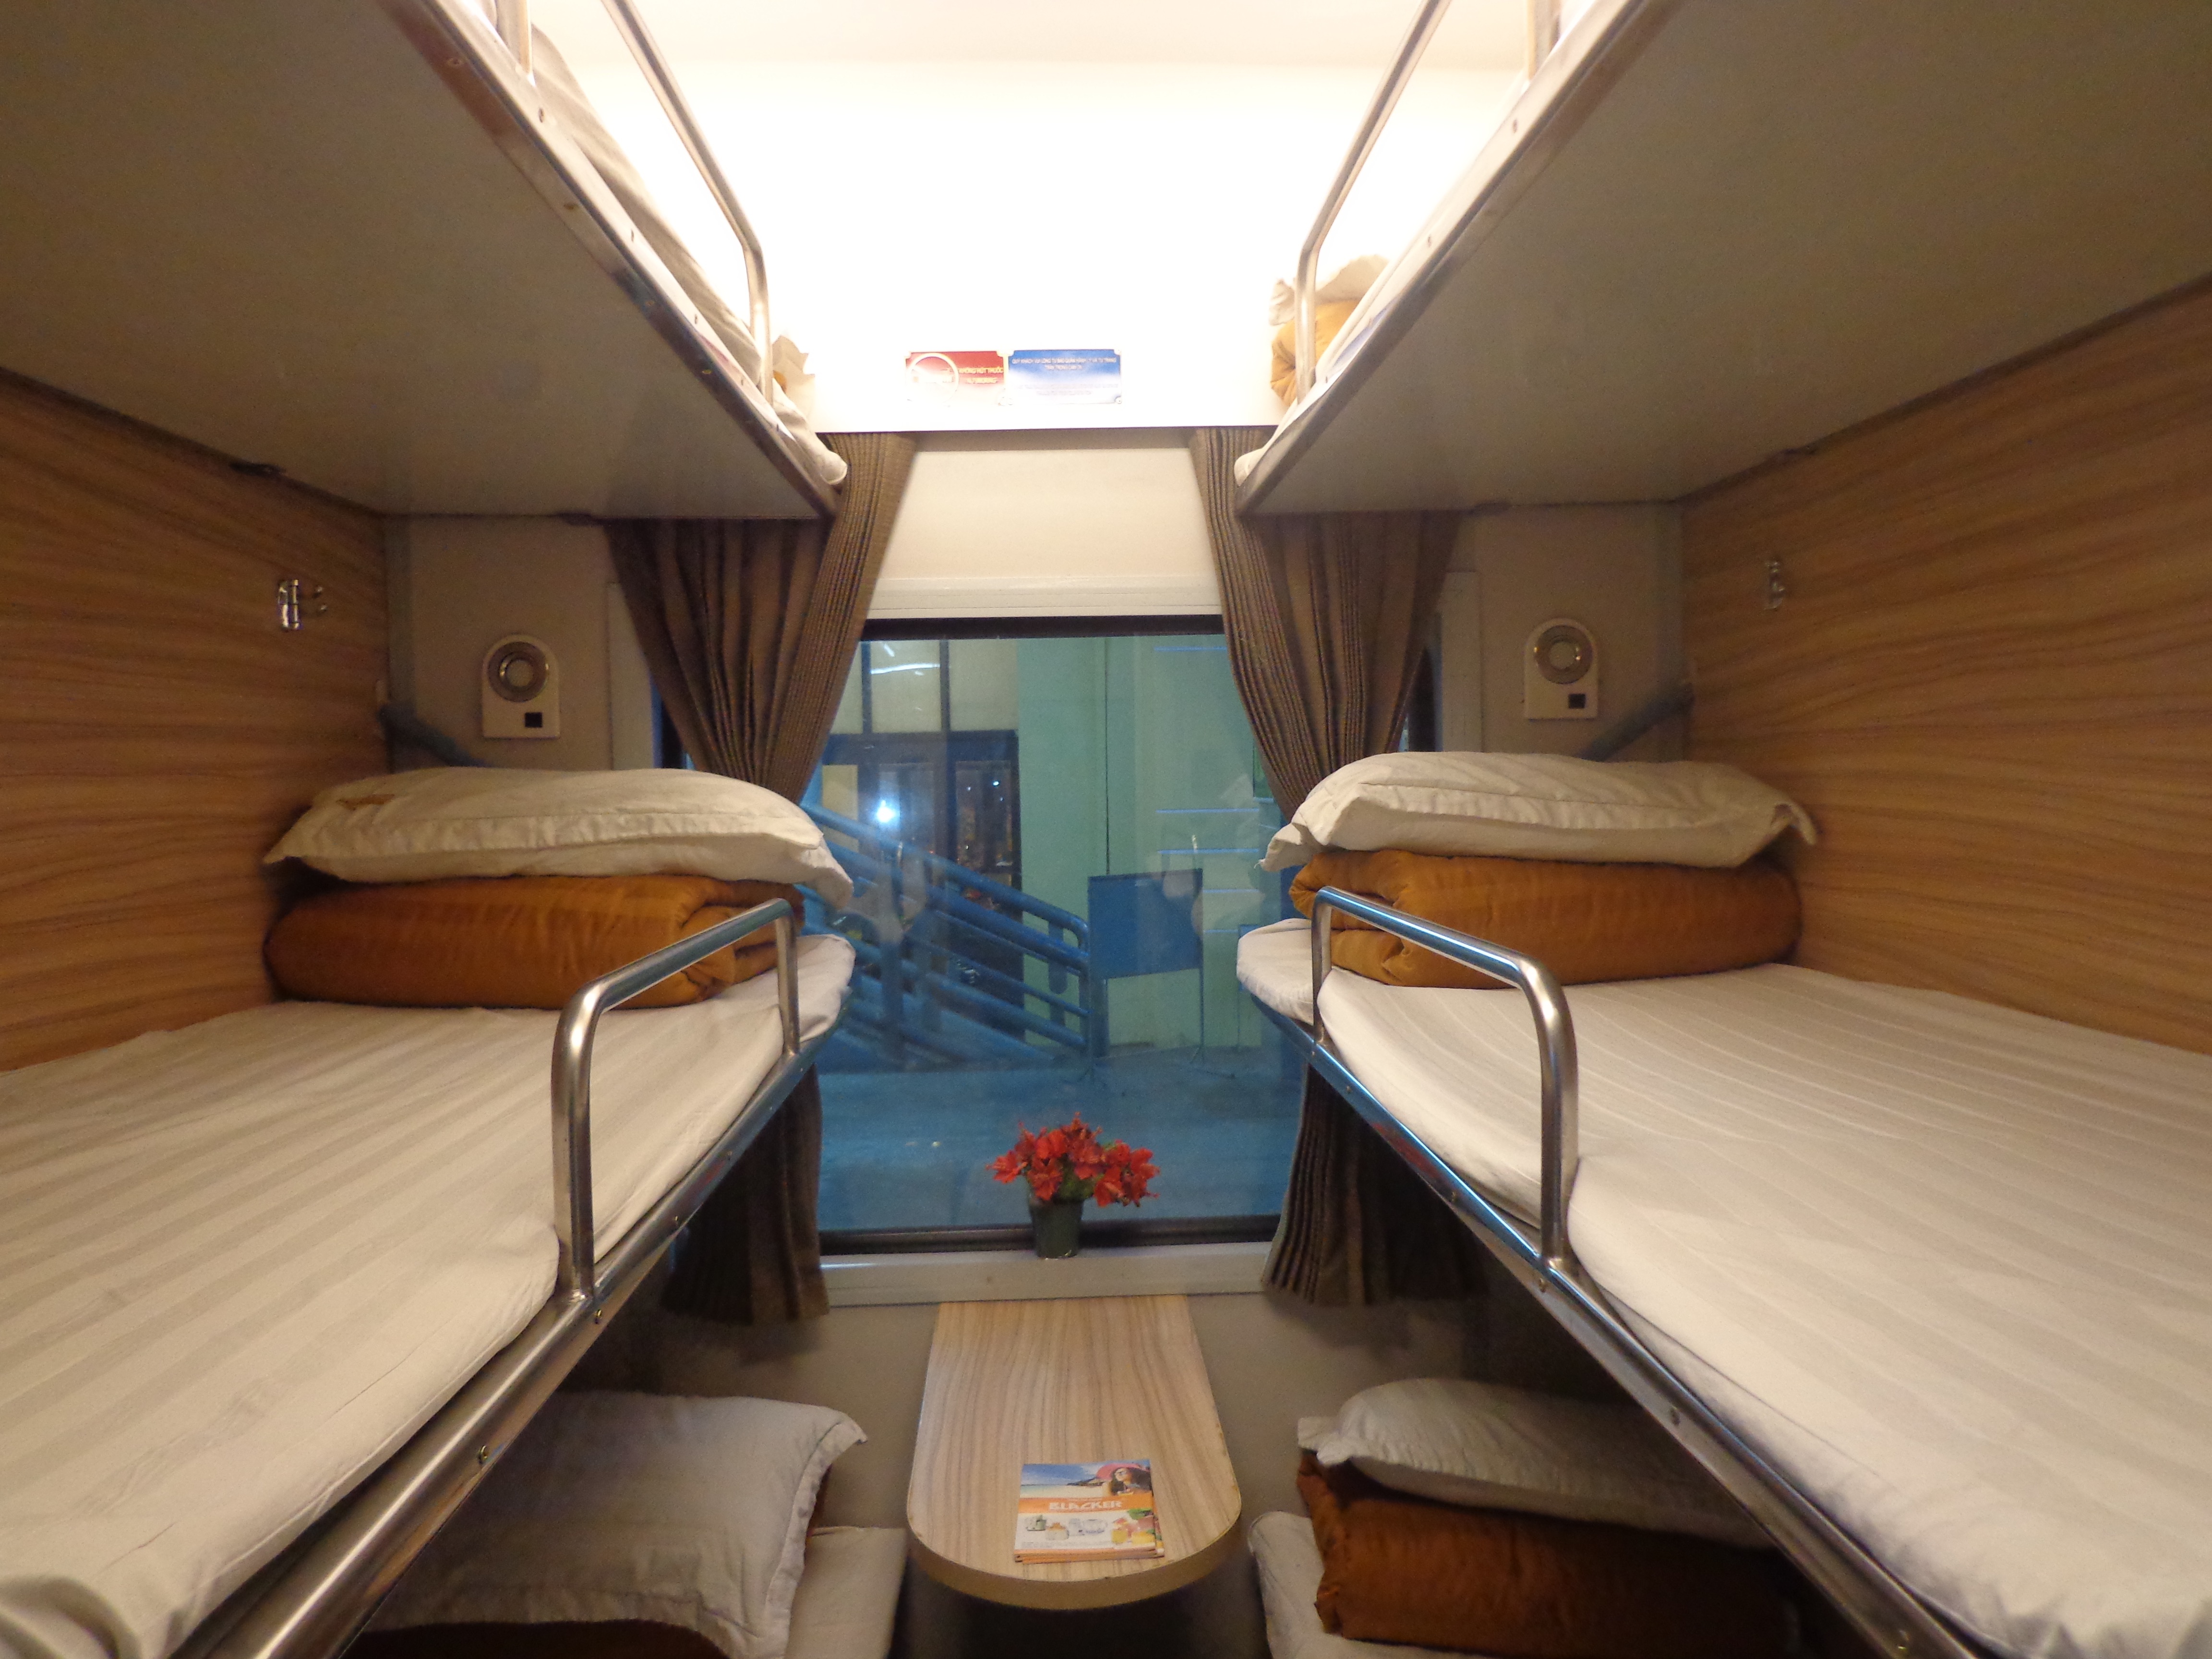 This is the second class sleeper with 6 beds per cabin. The interior and the facilities is better than our Indian counterpart.